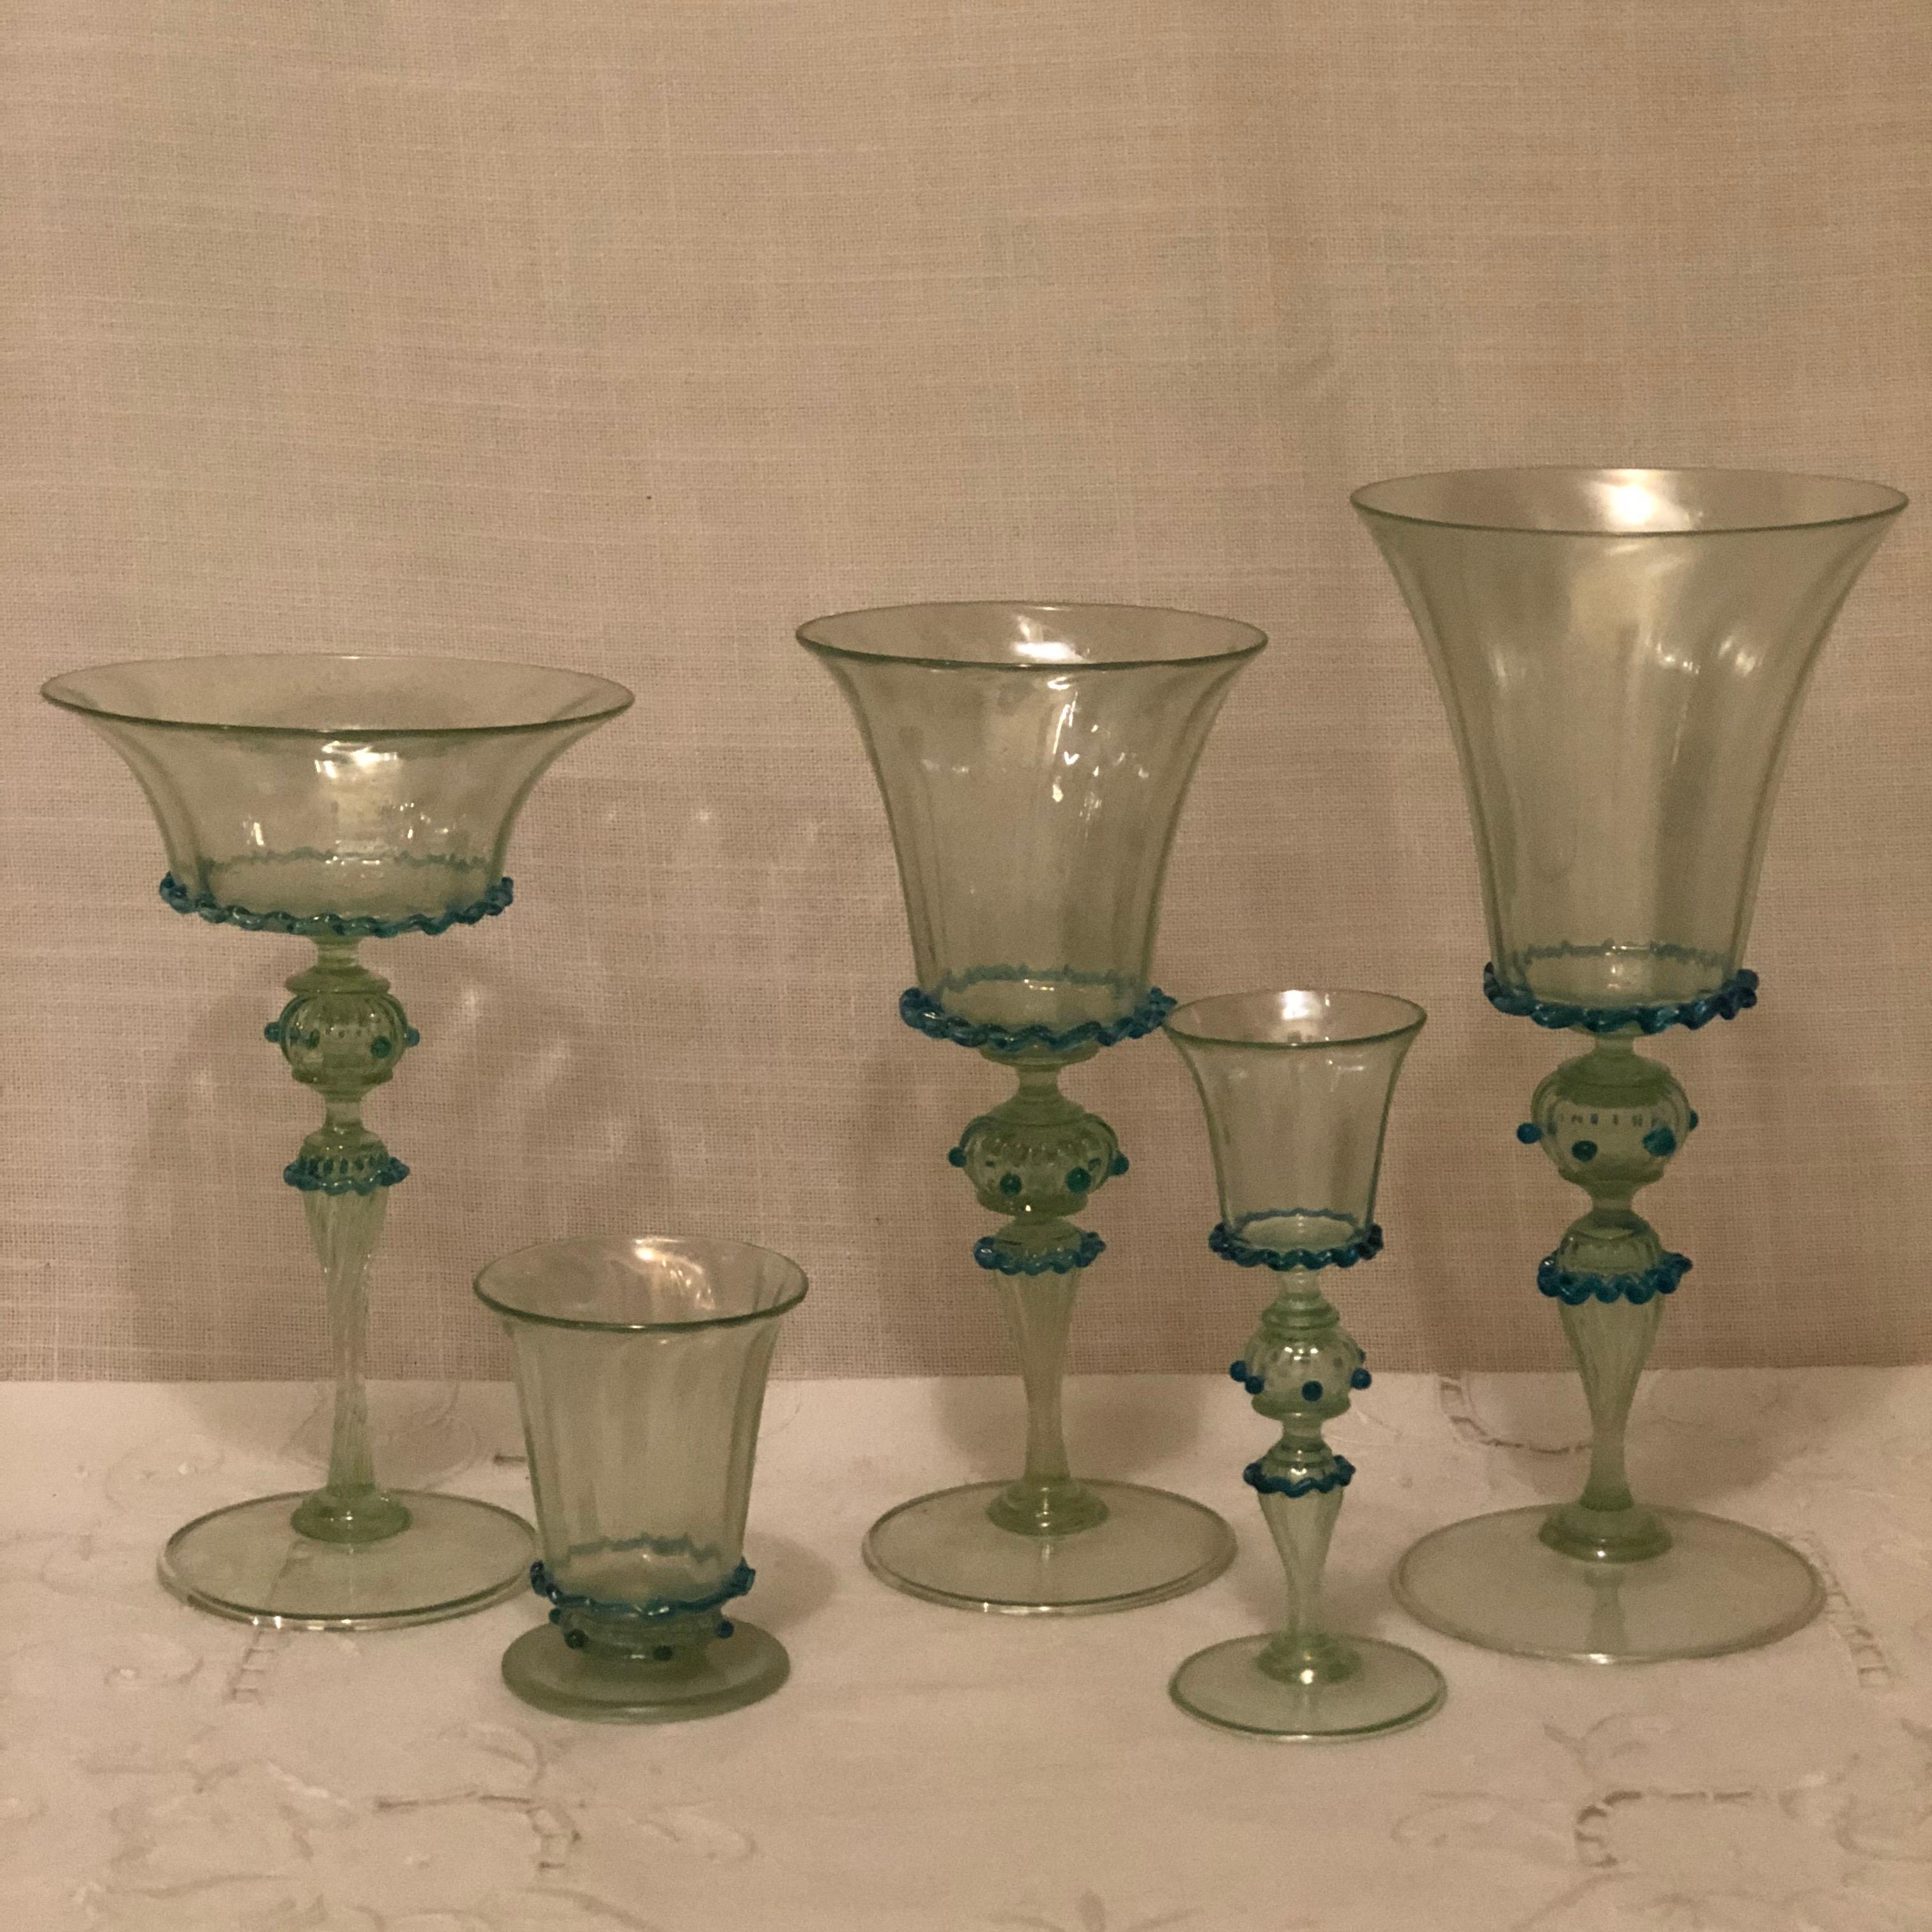 Set of 58 pieces of opalescent Salviati Venetian Stemware. The stemware was hand blown with the goal to make it pick up all the colors of the rainbow like an opal jewel would when you put it in different lighting. They are very striking, and they